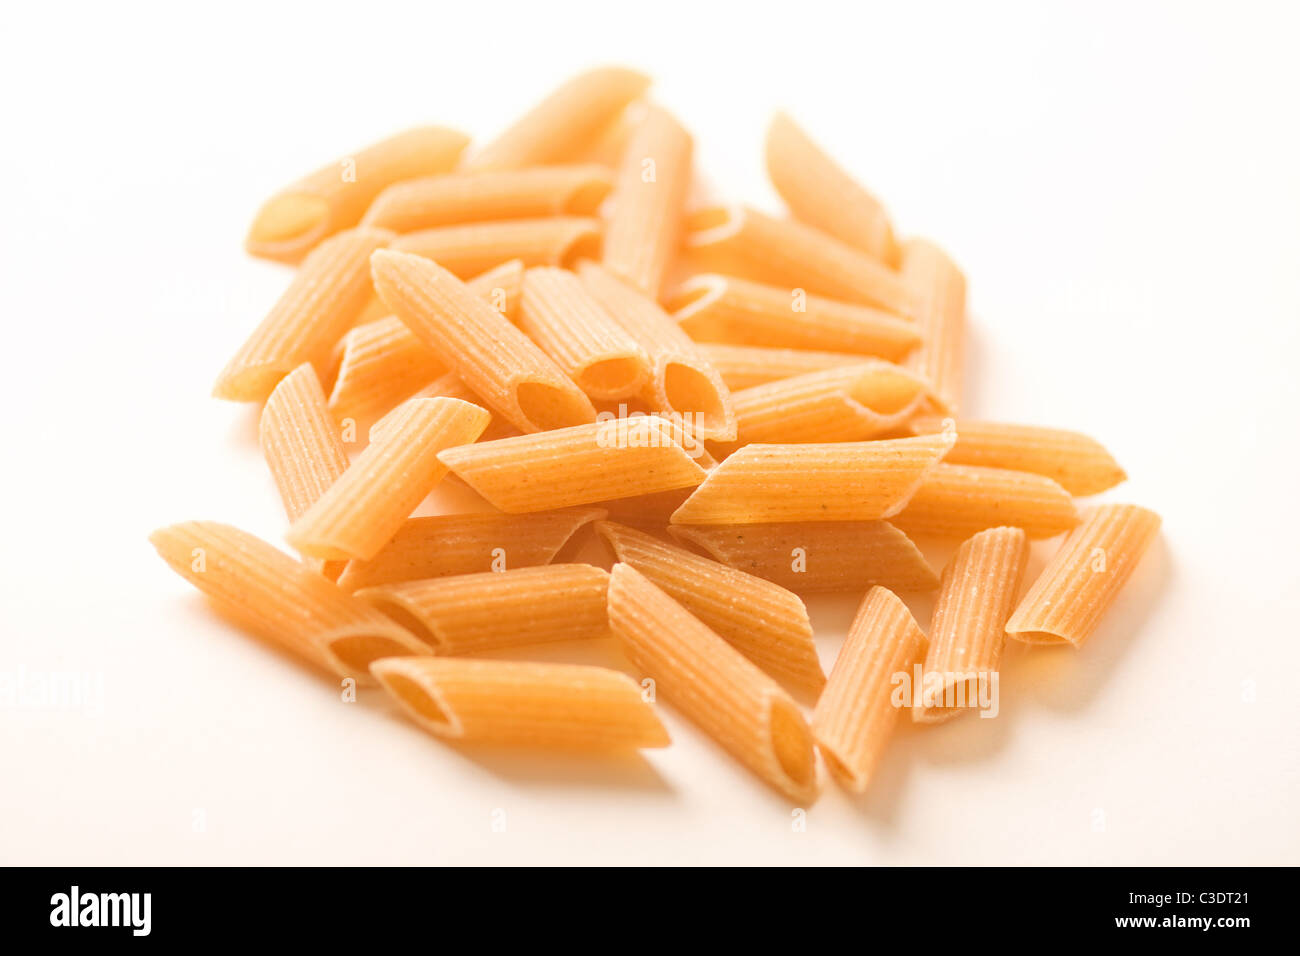 Dried Whole Wheat Penne Pasta Stock Photo